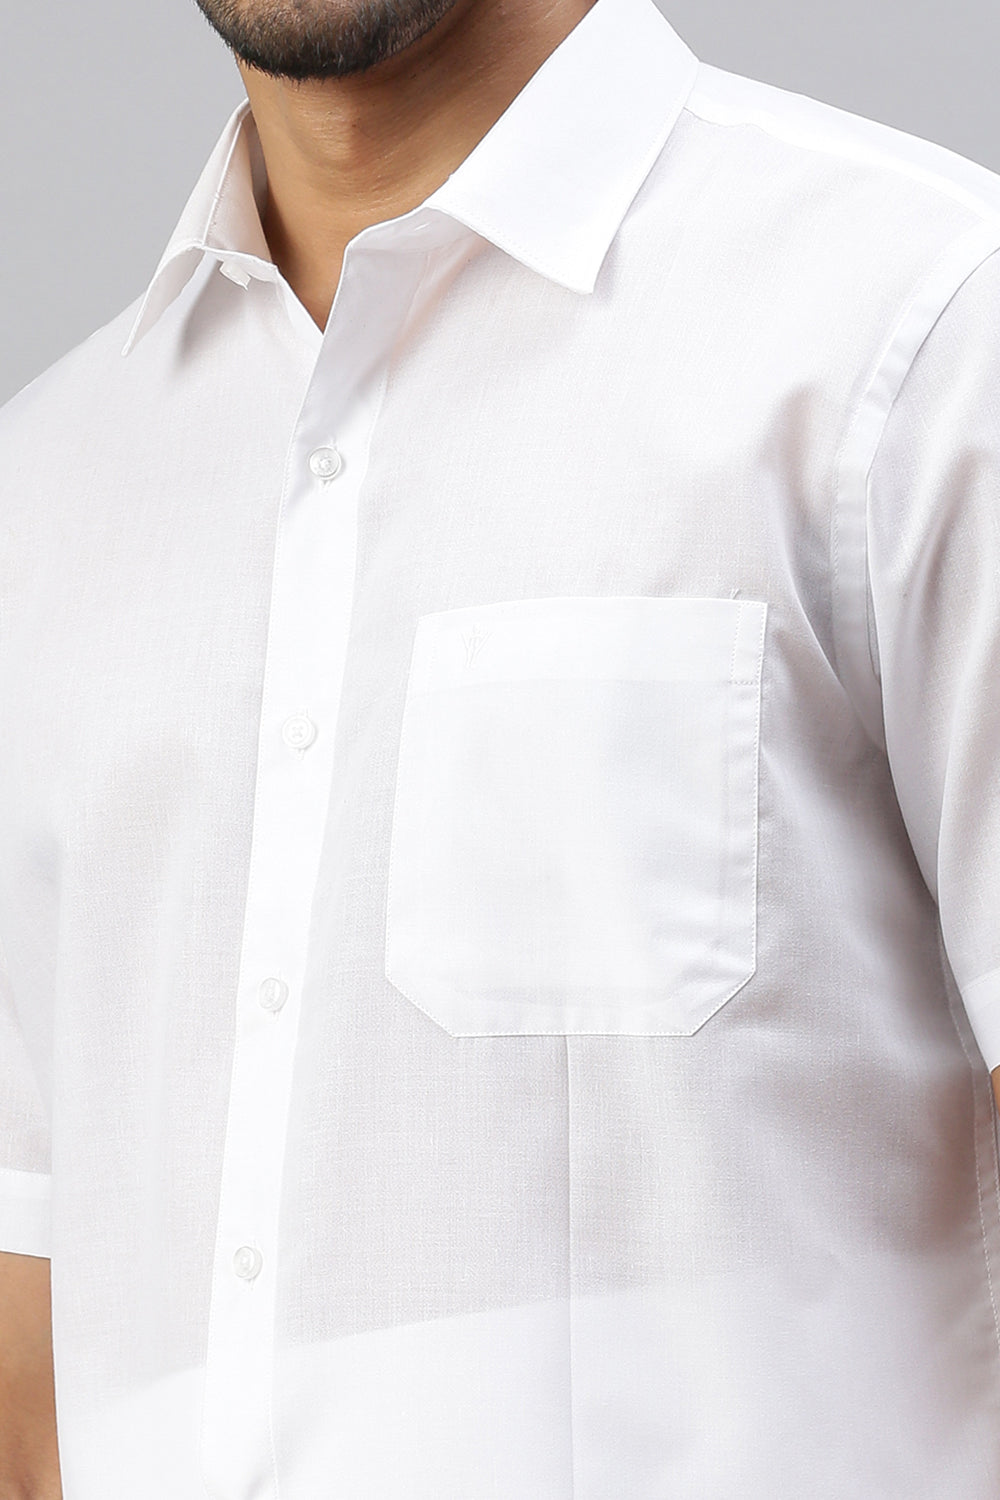 Mens Poly Cotton Half Sleeves White Shirt Expert -Zoom view